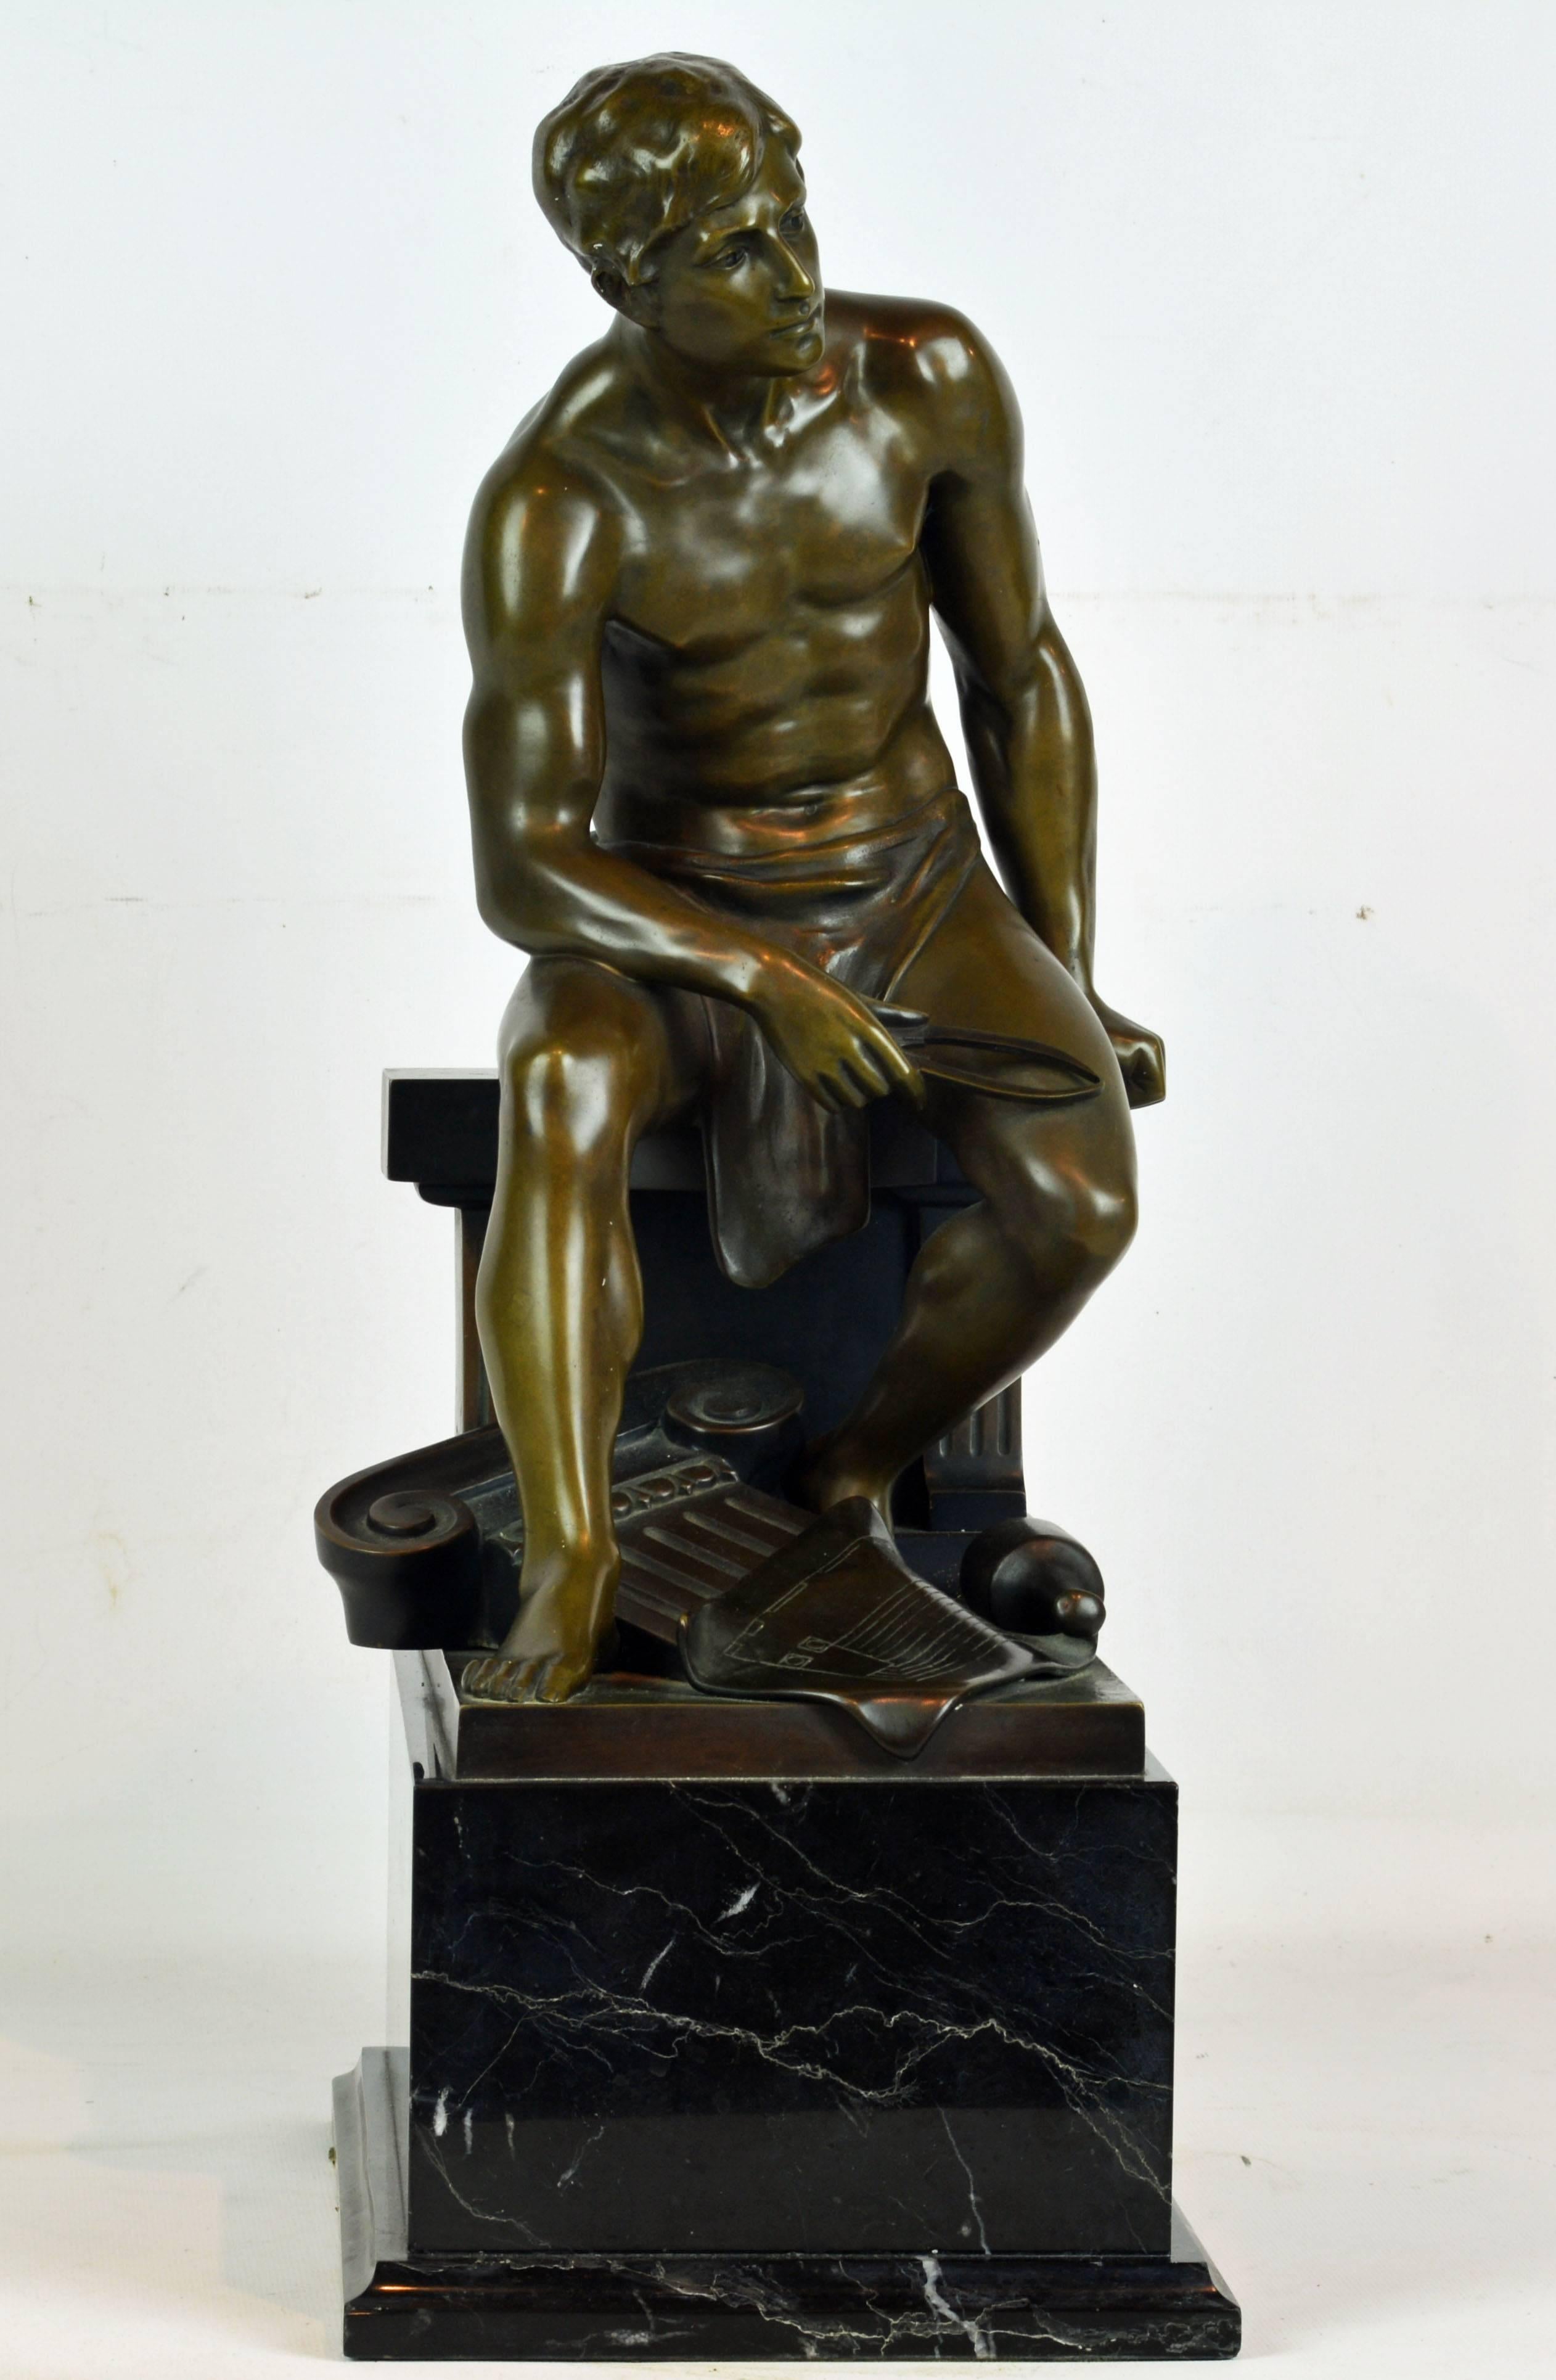 Modeled and signed by the German sculptor Hans Keck (active 1900-1922) this impressive bronze figure, standing 20 inches tall, represents a well built young man wearing a loin cloth sitting on a stone ledge with a contemplative expression surrounded